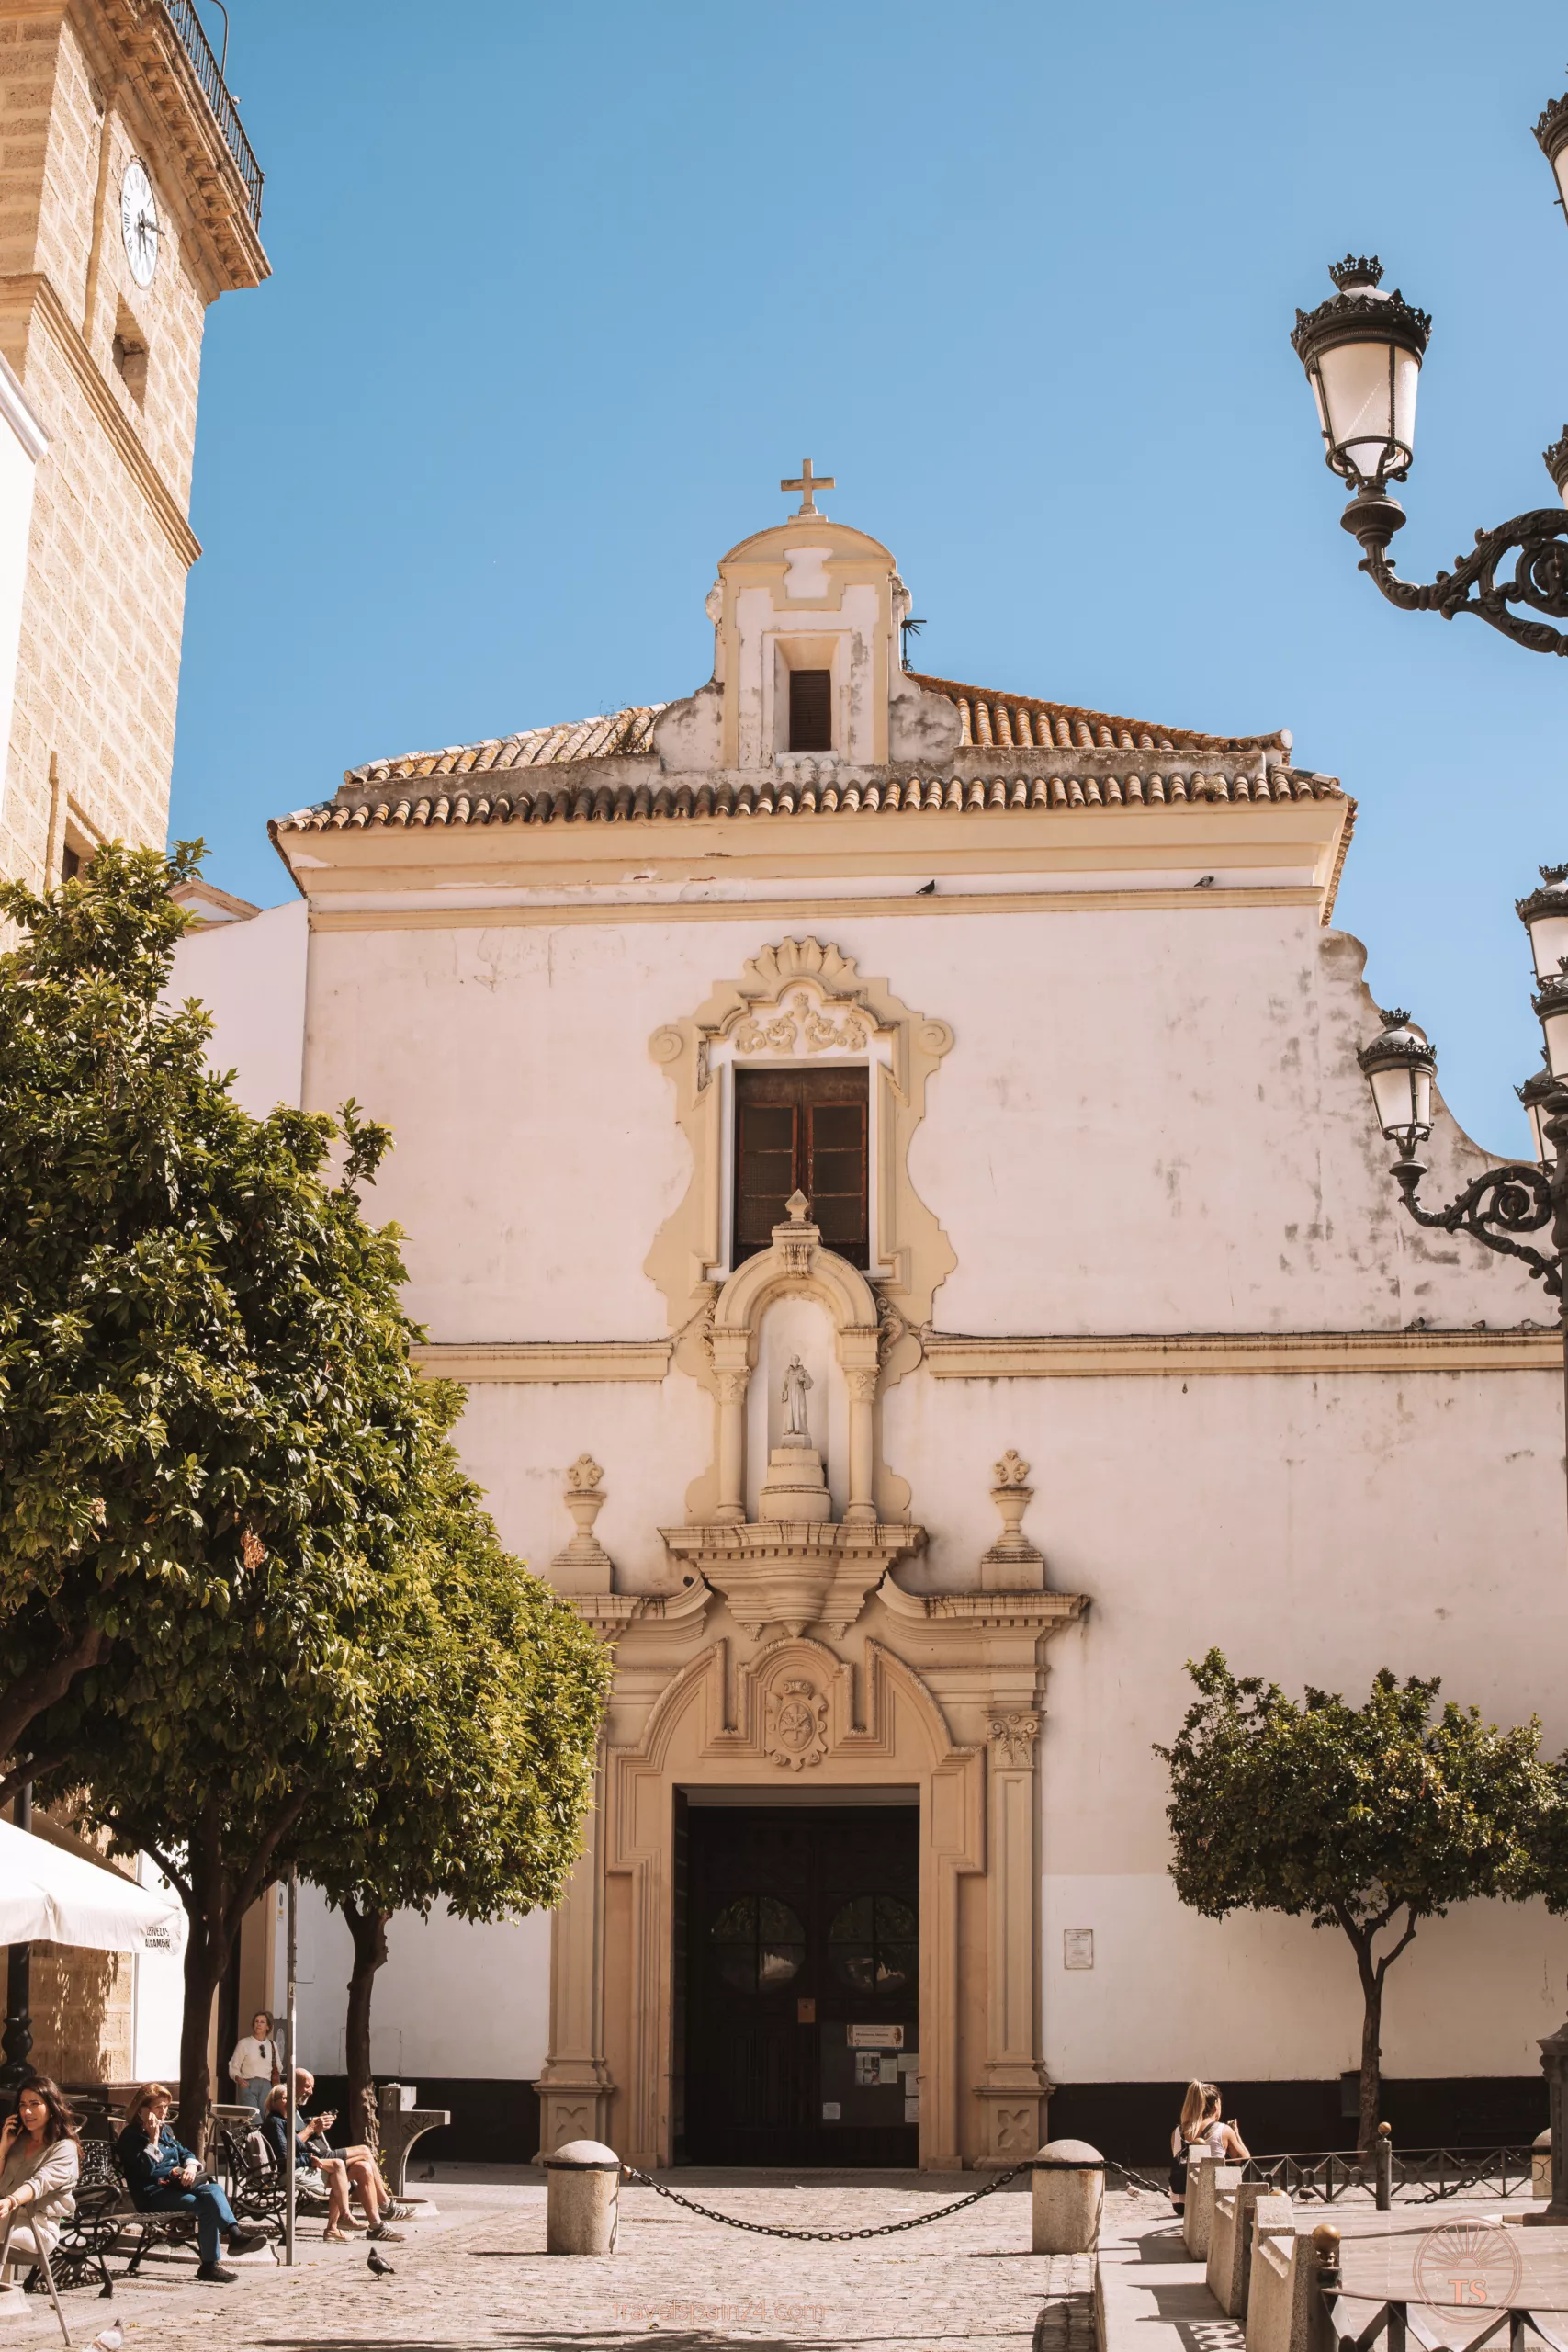 Convento de San Francisco in Cadiz, with people enjoying the sunny day seated at the terrace. This scene is one of the Cadiz highlights, combining historical architecture with the lively social atmosphere.
